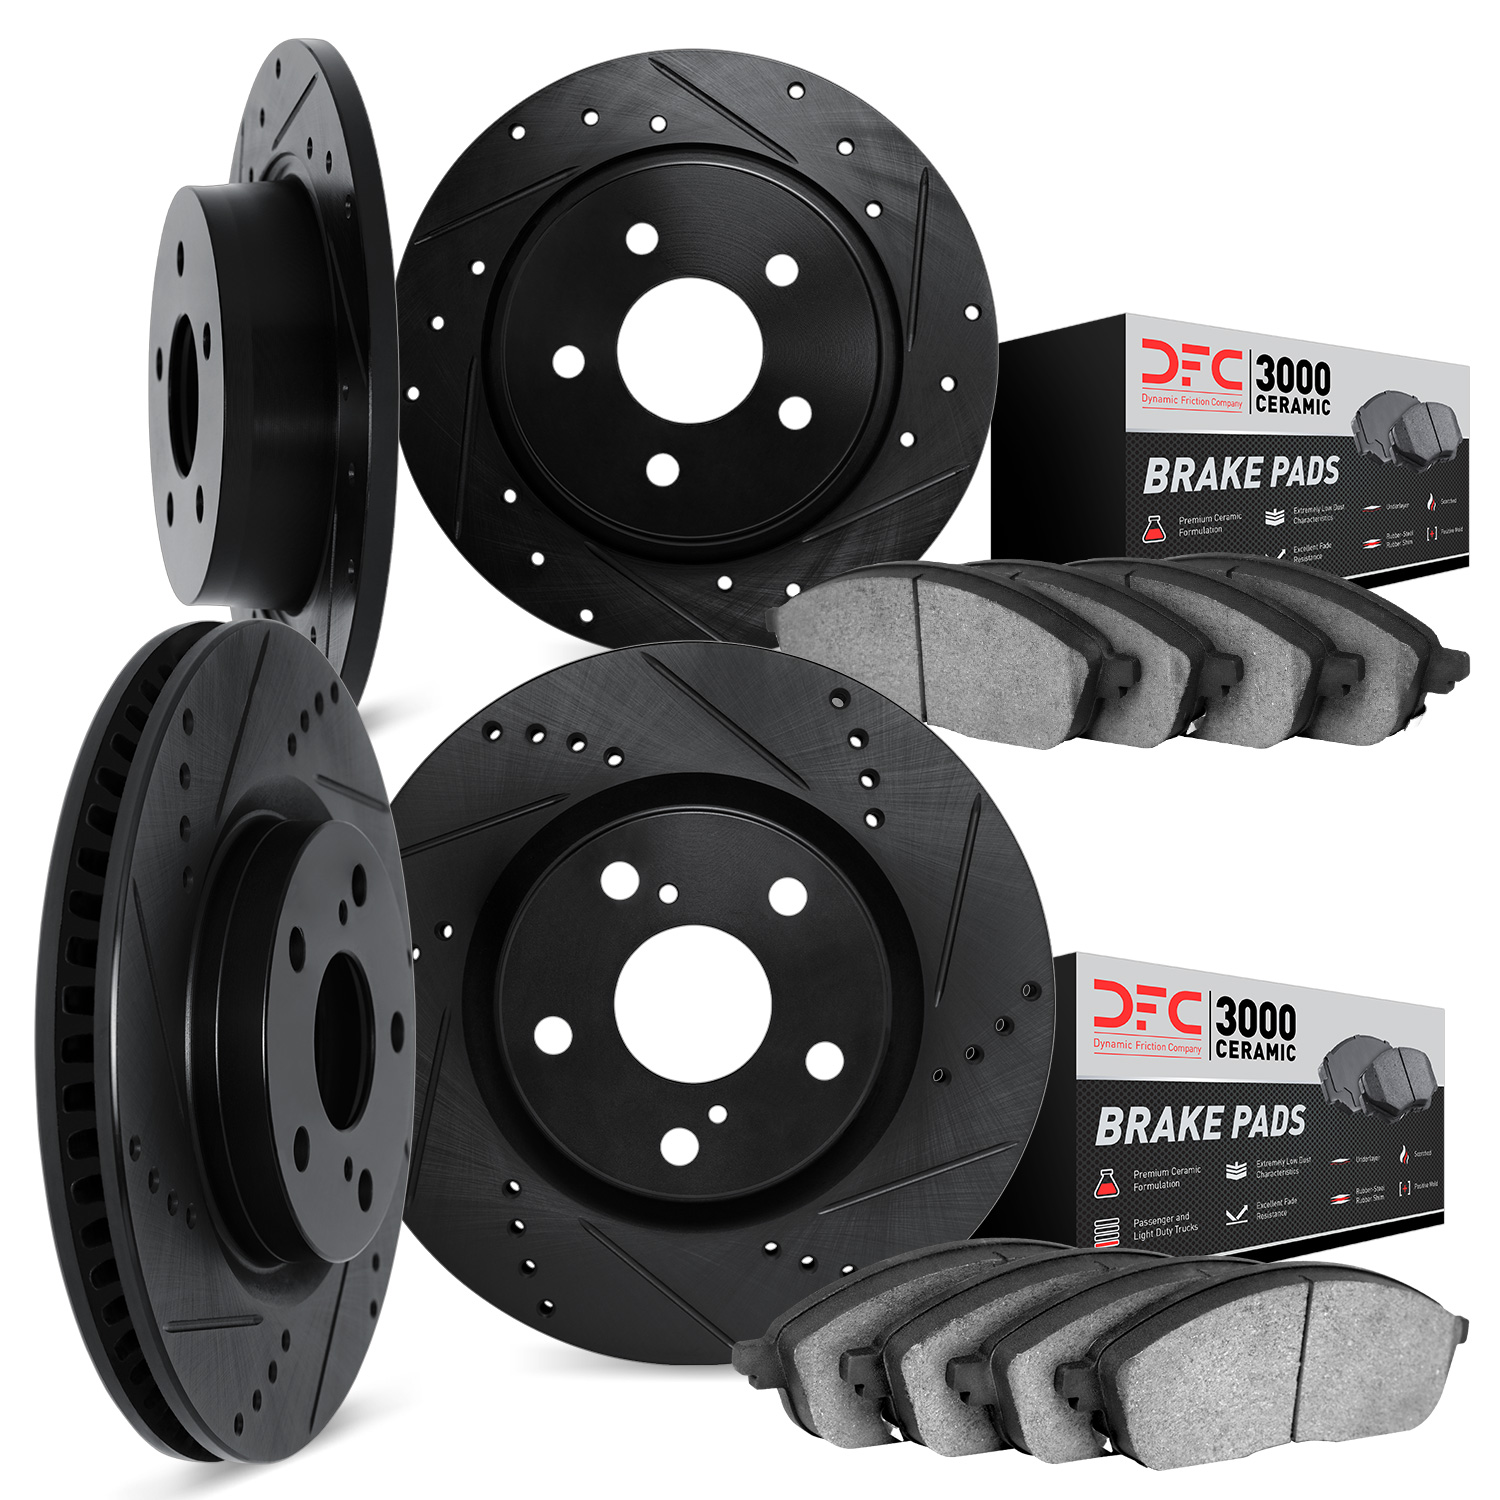 8304-59027 Drilled/Slotted Brake Rotors with 3000-Series Ceramic Brake Pads Kit [Black], 2001-2002 Acura/Honda, Position: Front